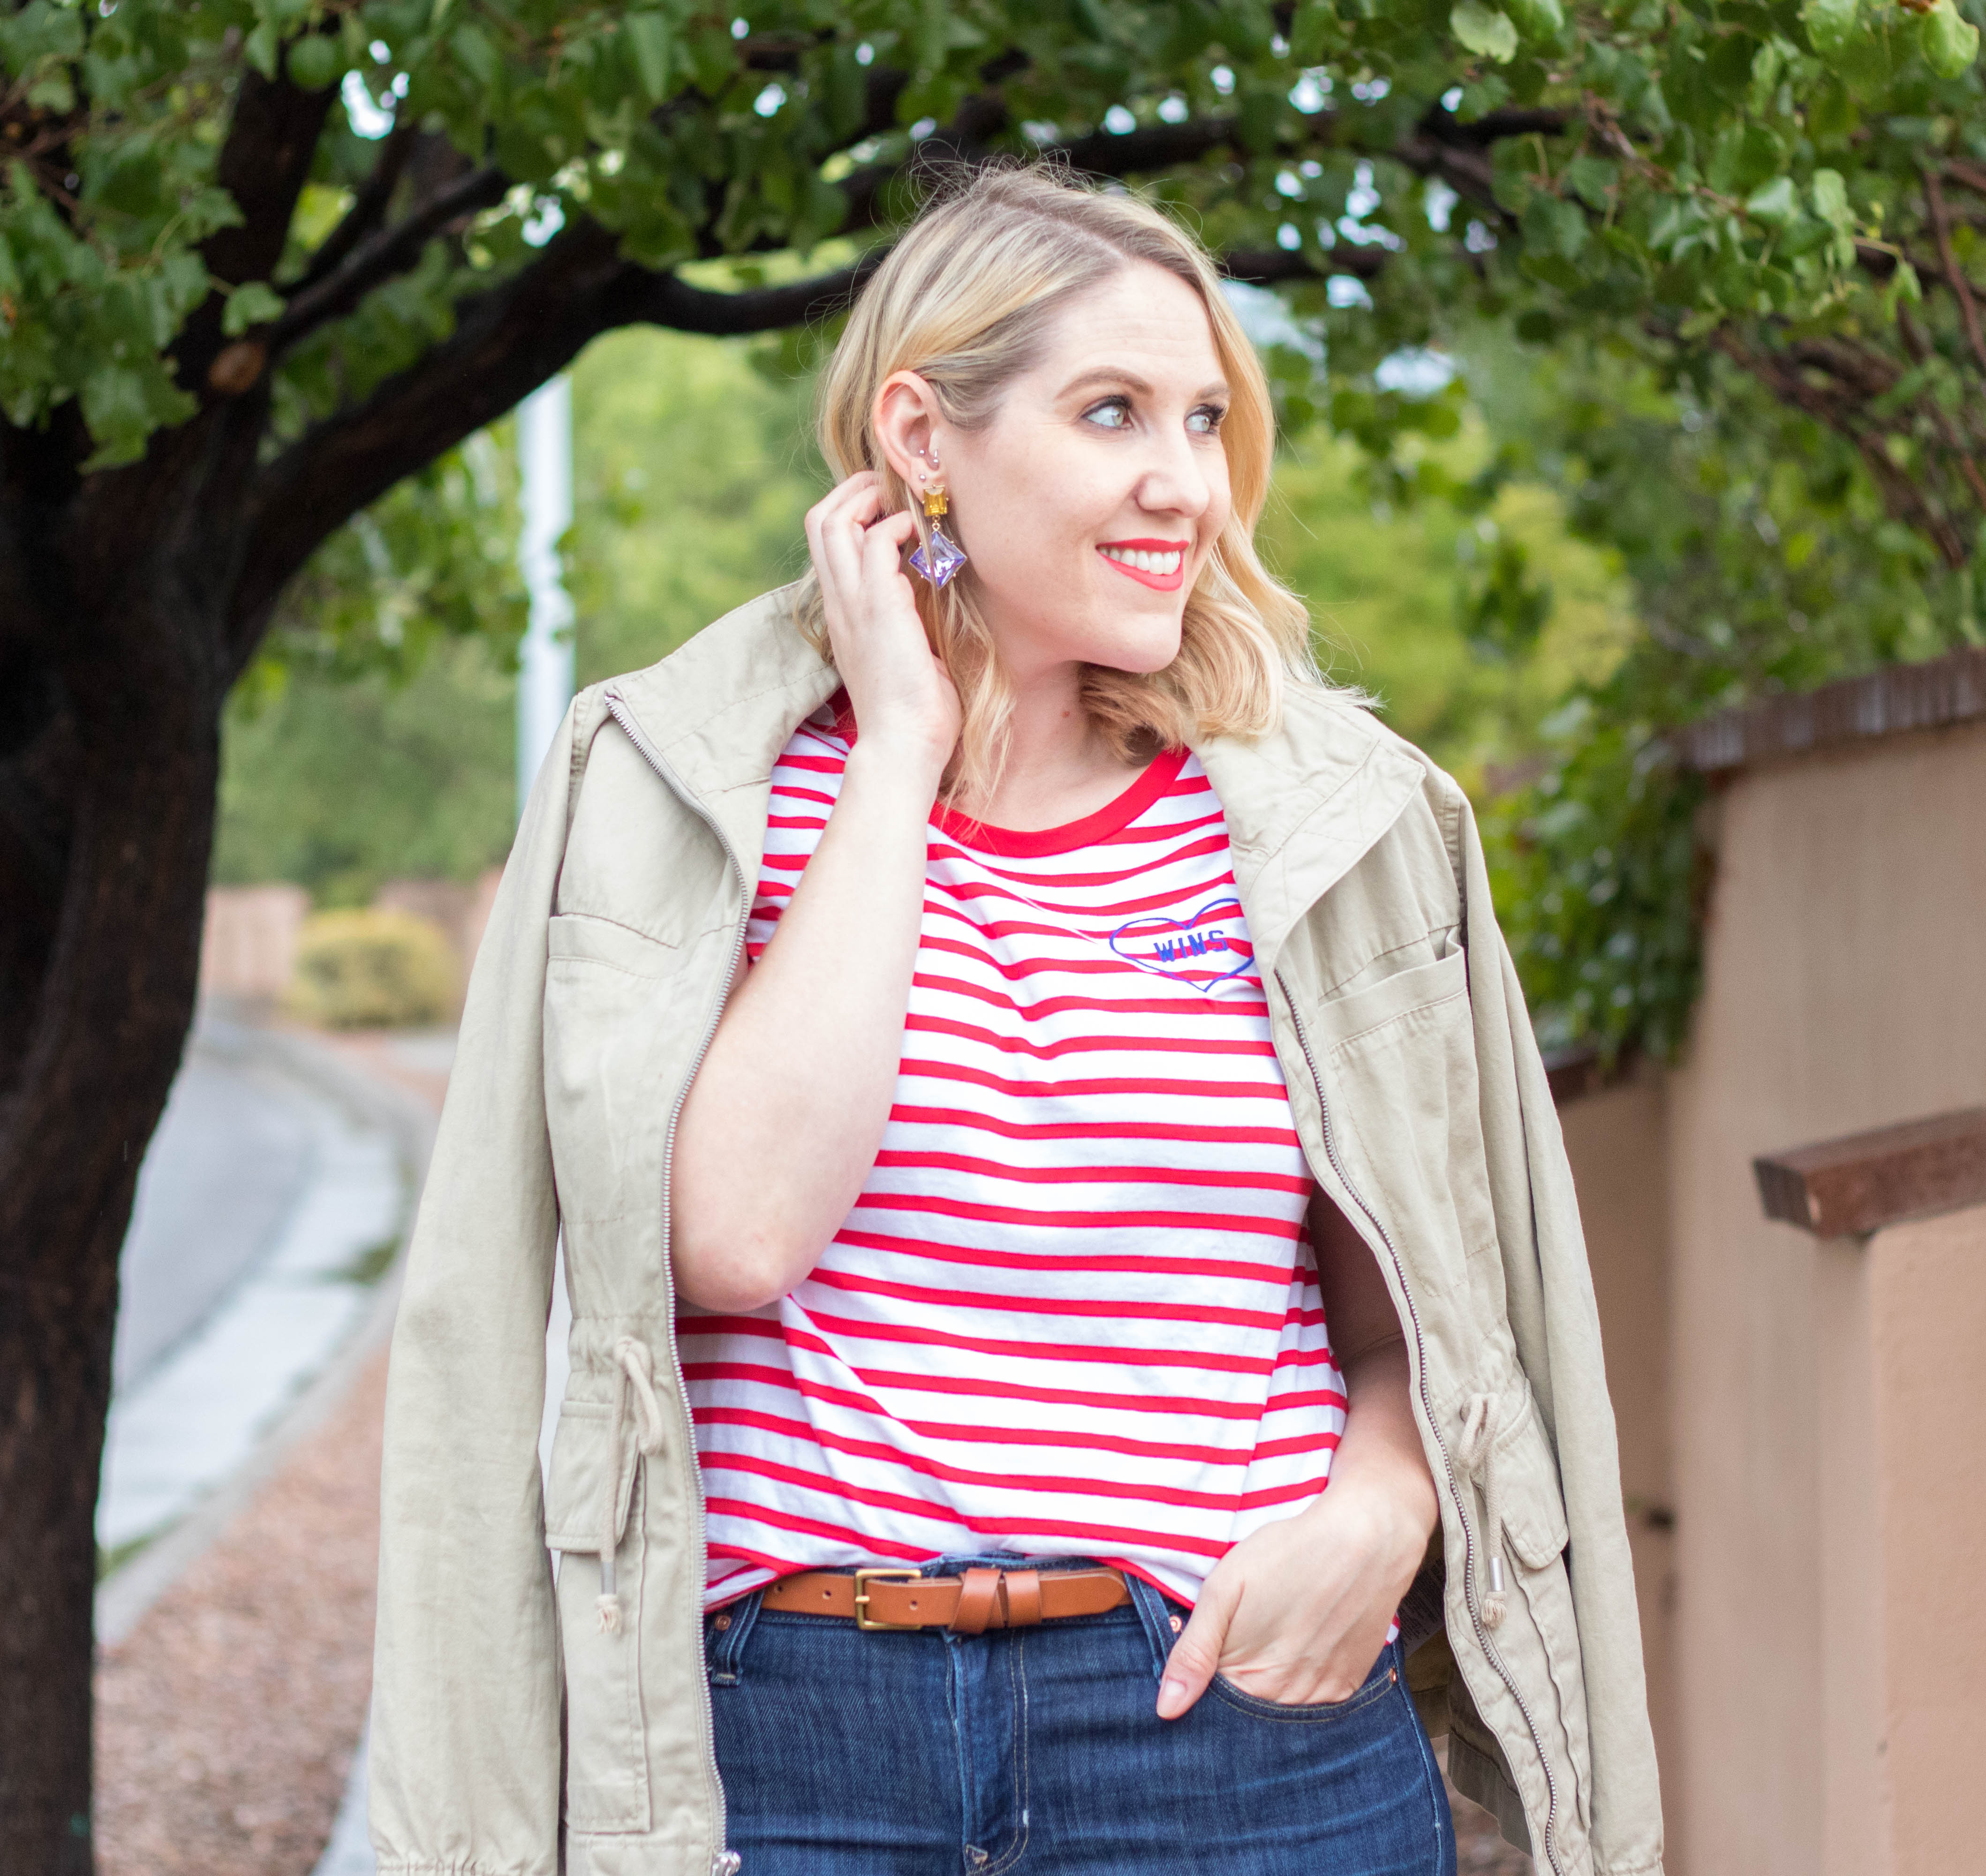 off the shoulder jacket for fall #oldnavystyle #sayhi #casualoutfit #fallstyle